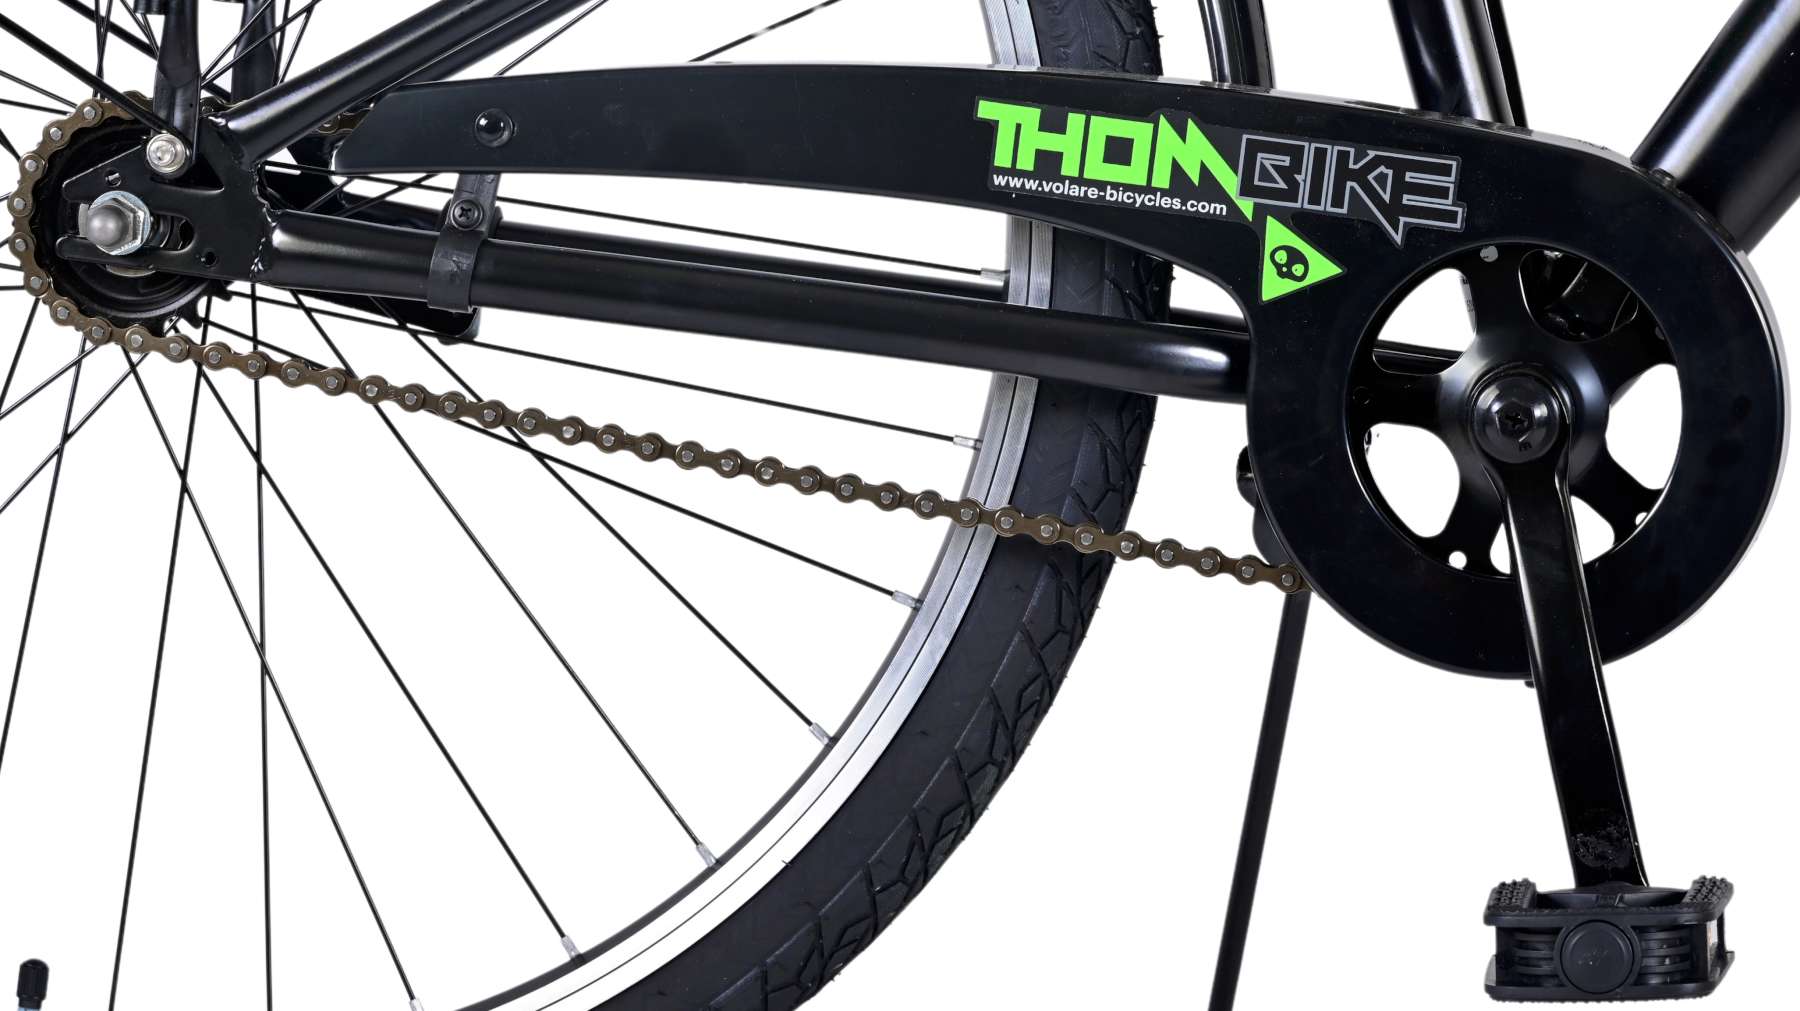 Thombike_26_inch_-_5-W1800_rppo-jh